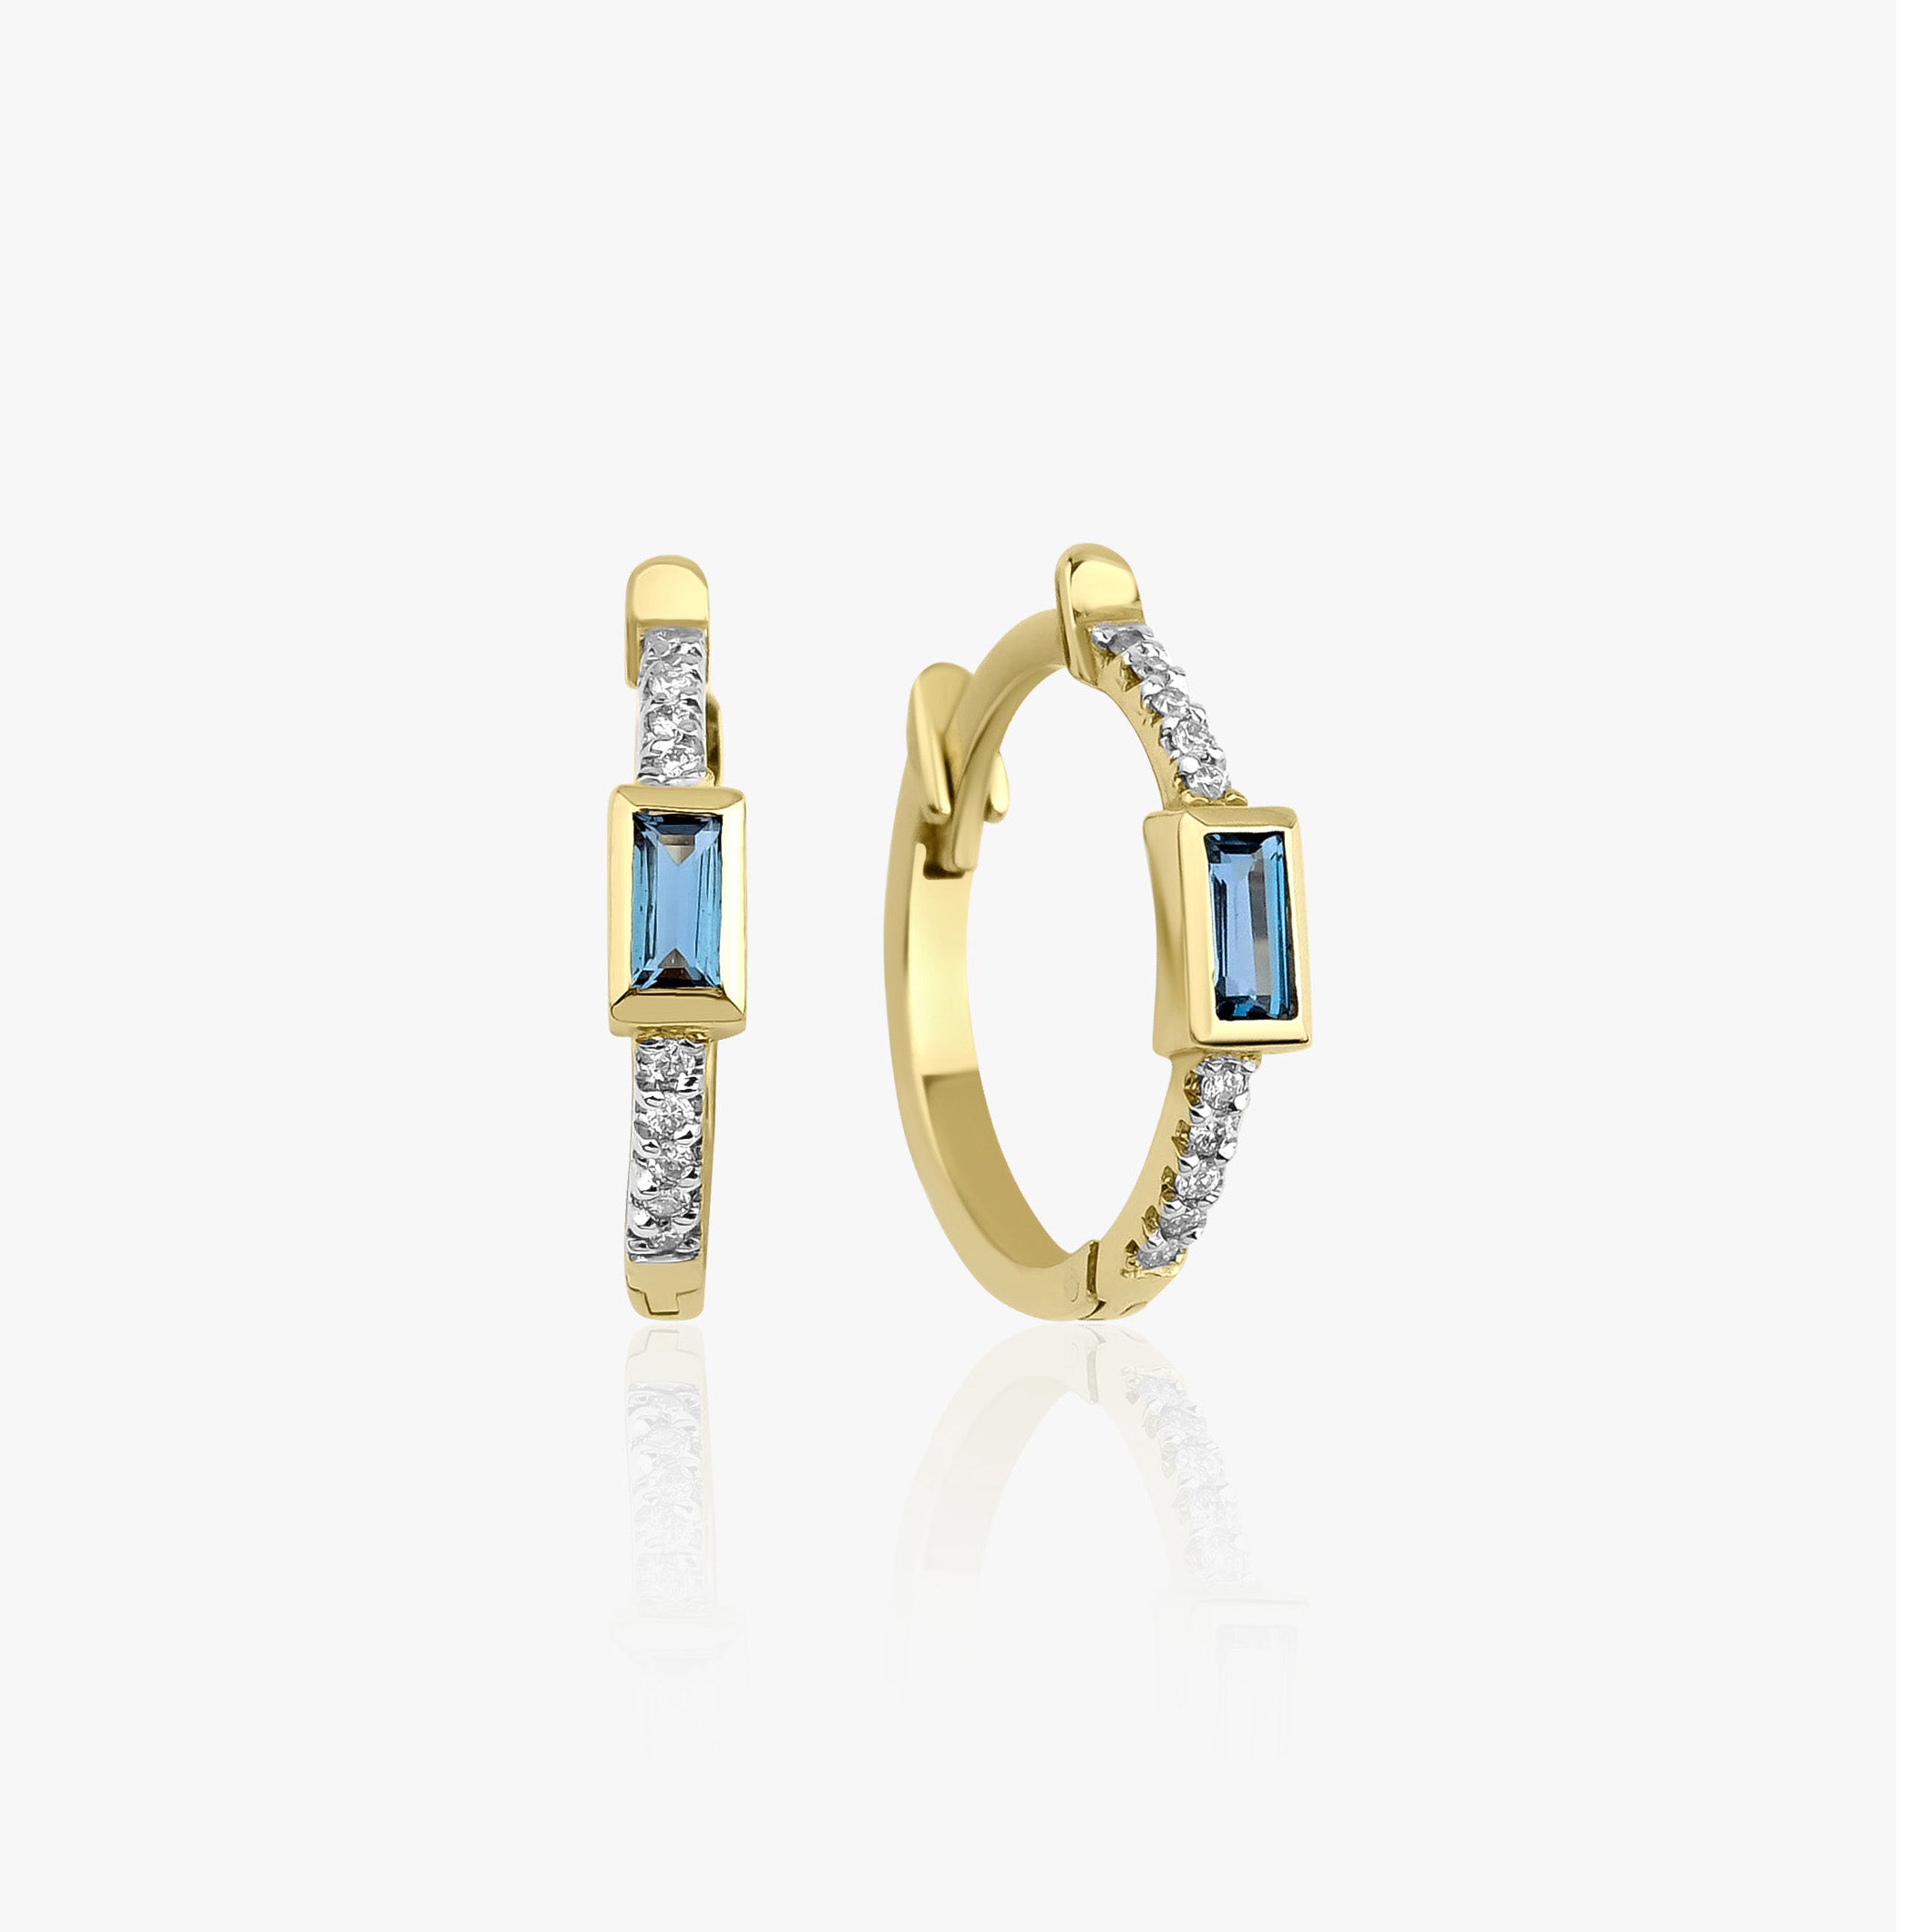 Diamond and Blue Topaz Earrings Available in 14K and 18K Gold